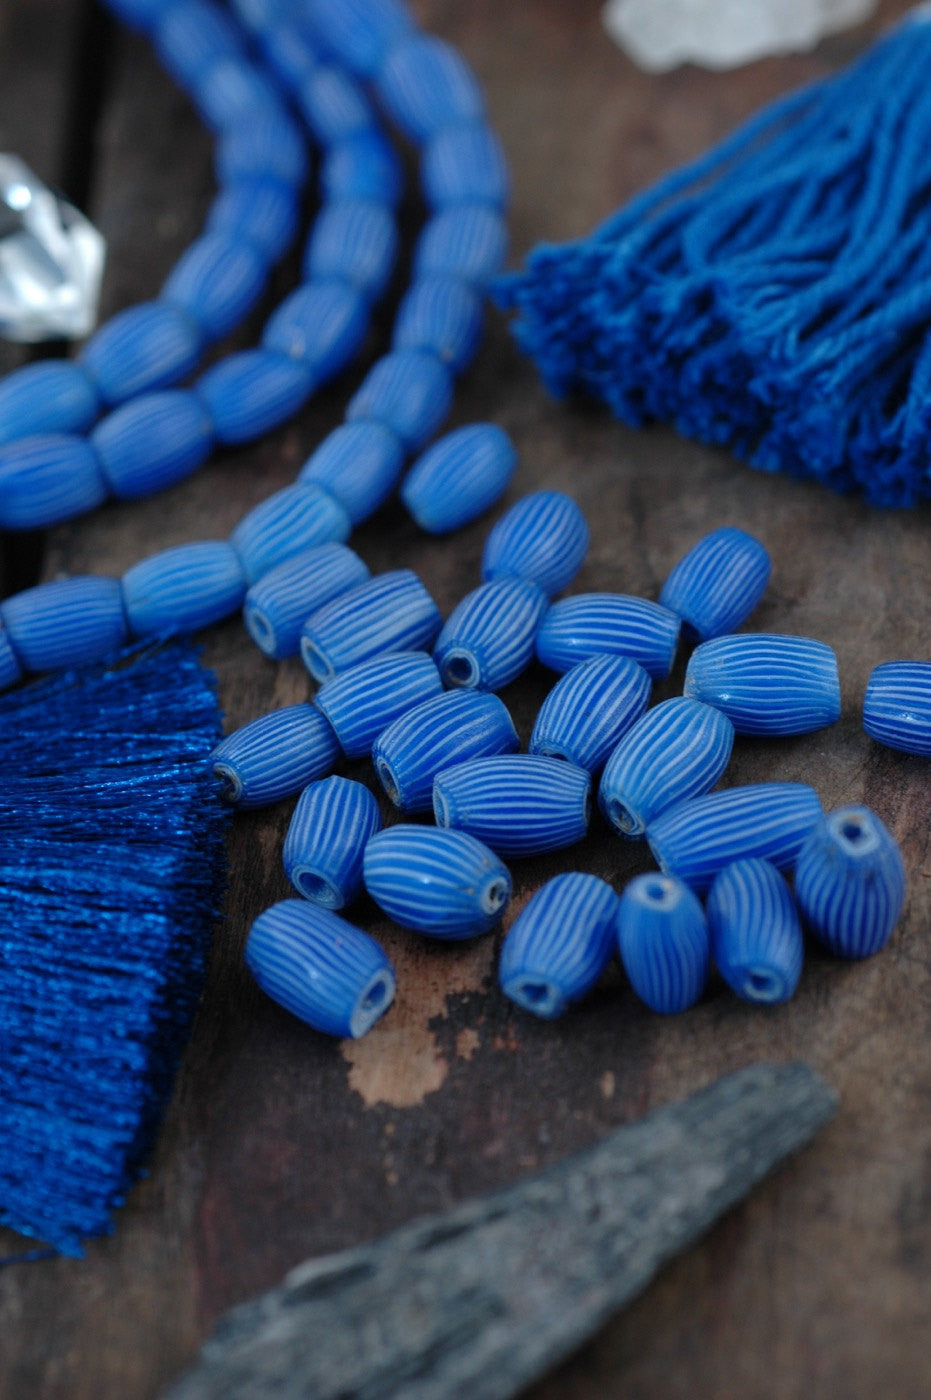 Blue Gooseberry Antique African (Italian) Glass Oval, Hand Drawn Trade Beads, 8x10mm, 4 Loose Beads, Rare, Collectible Jewelry Making Suppy - ShopWomanShopsWorld.com. Bone Beads, Tassels, Pom Poms, African Beads.